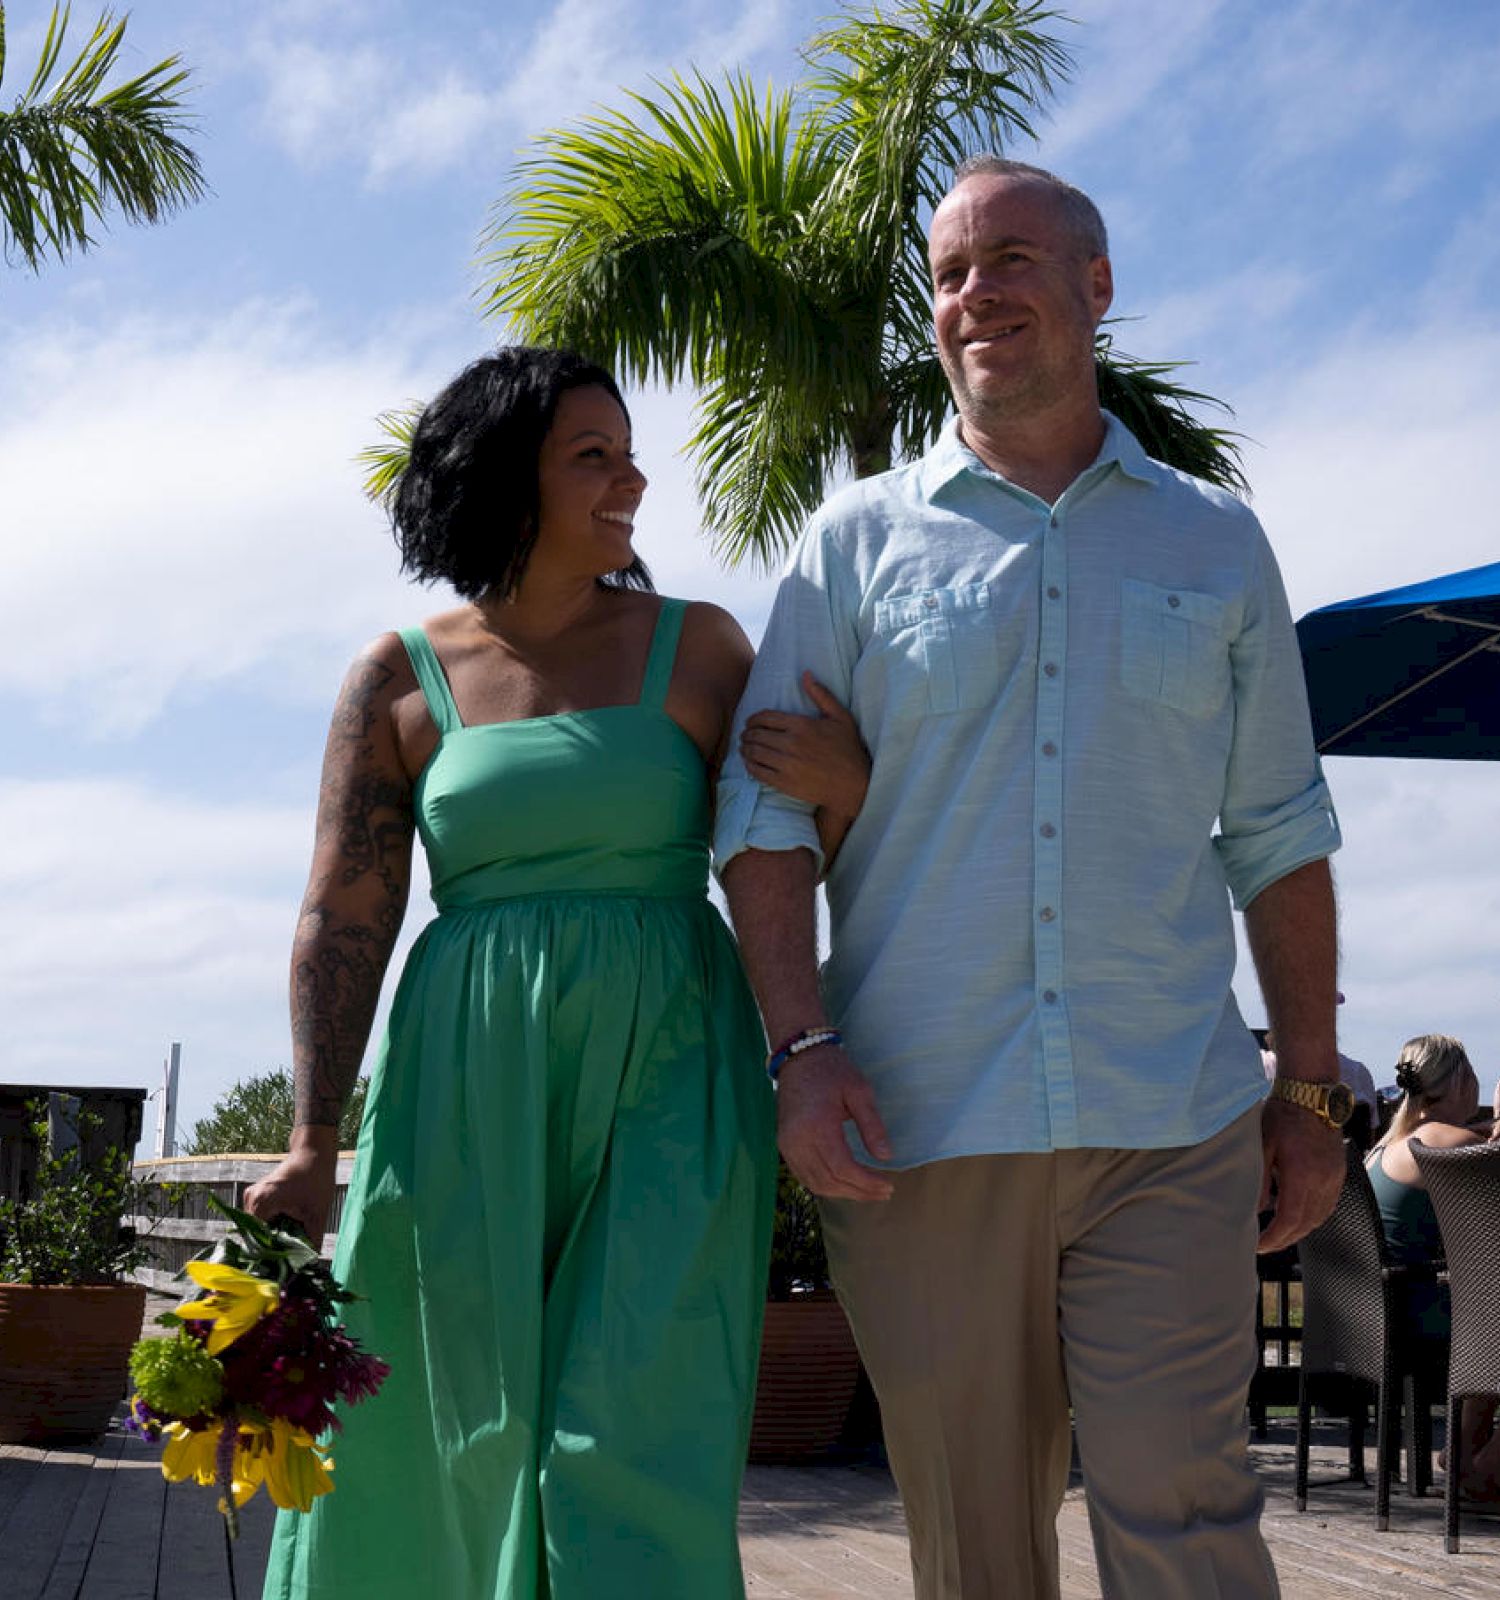 A happy couple walks arm in arm under a sunny sky, with palm trees and an outdoor seating area in the background, the woman holding flowers.